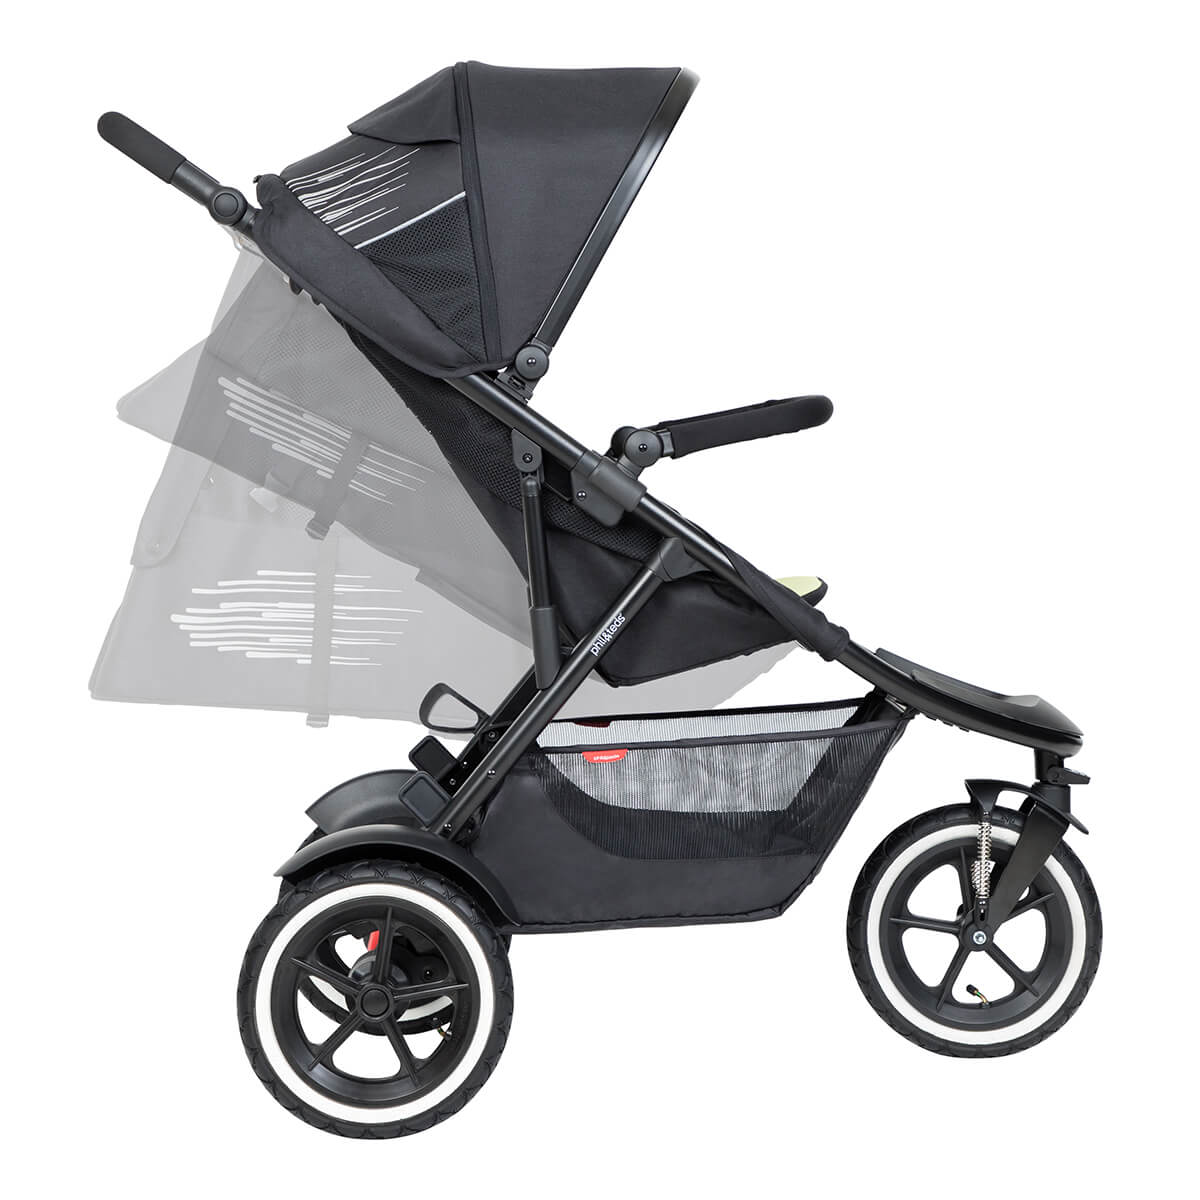 https://cdn.accentuate.io/4509900832845/19466203824322/philteds-sport-buggy-can-recline-in-multiple-angles-including-full-recline-for-newborn-baby-v1626485396837.jpg?1200x1200